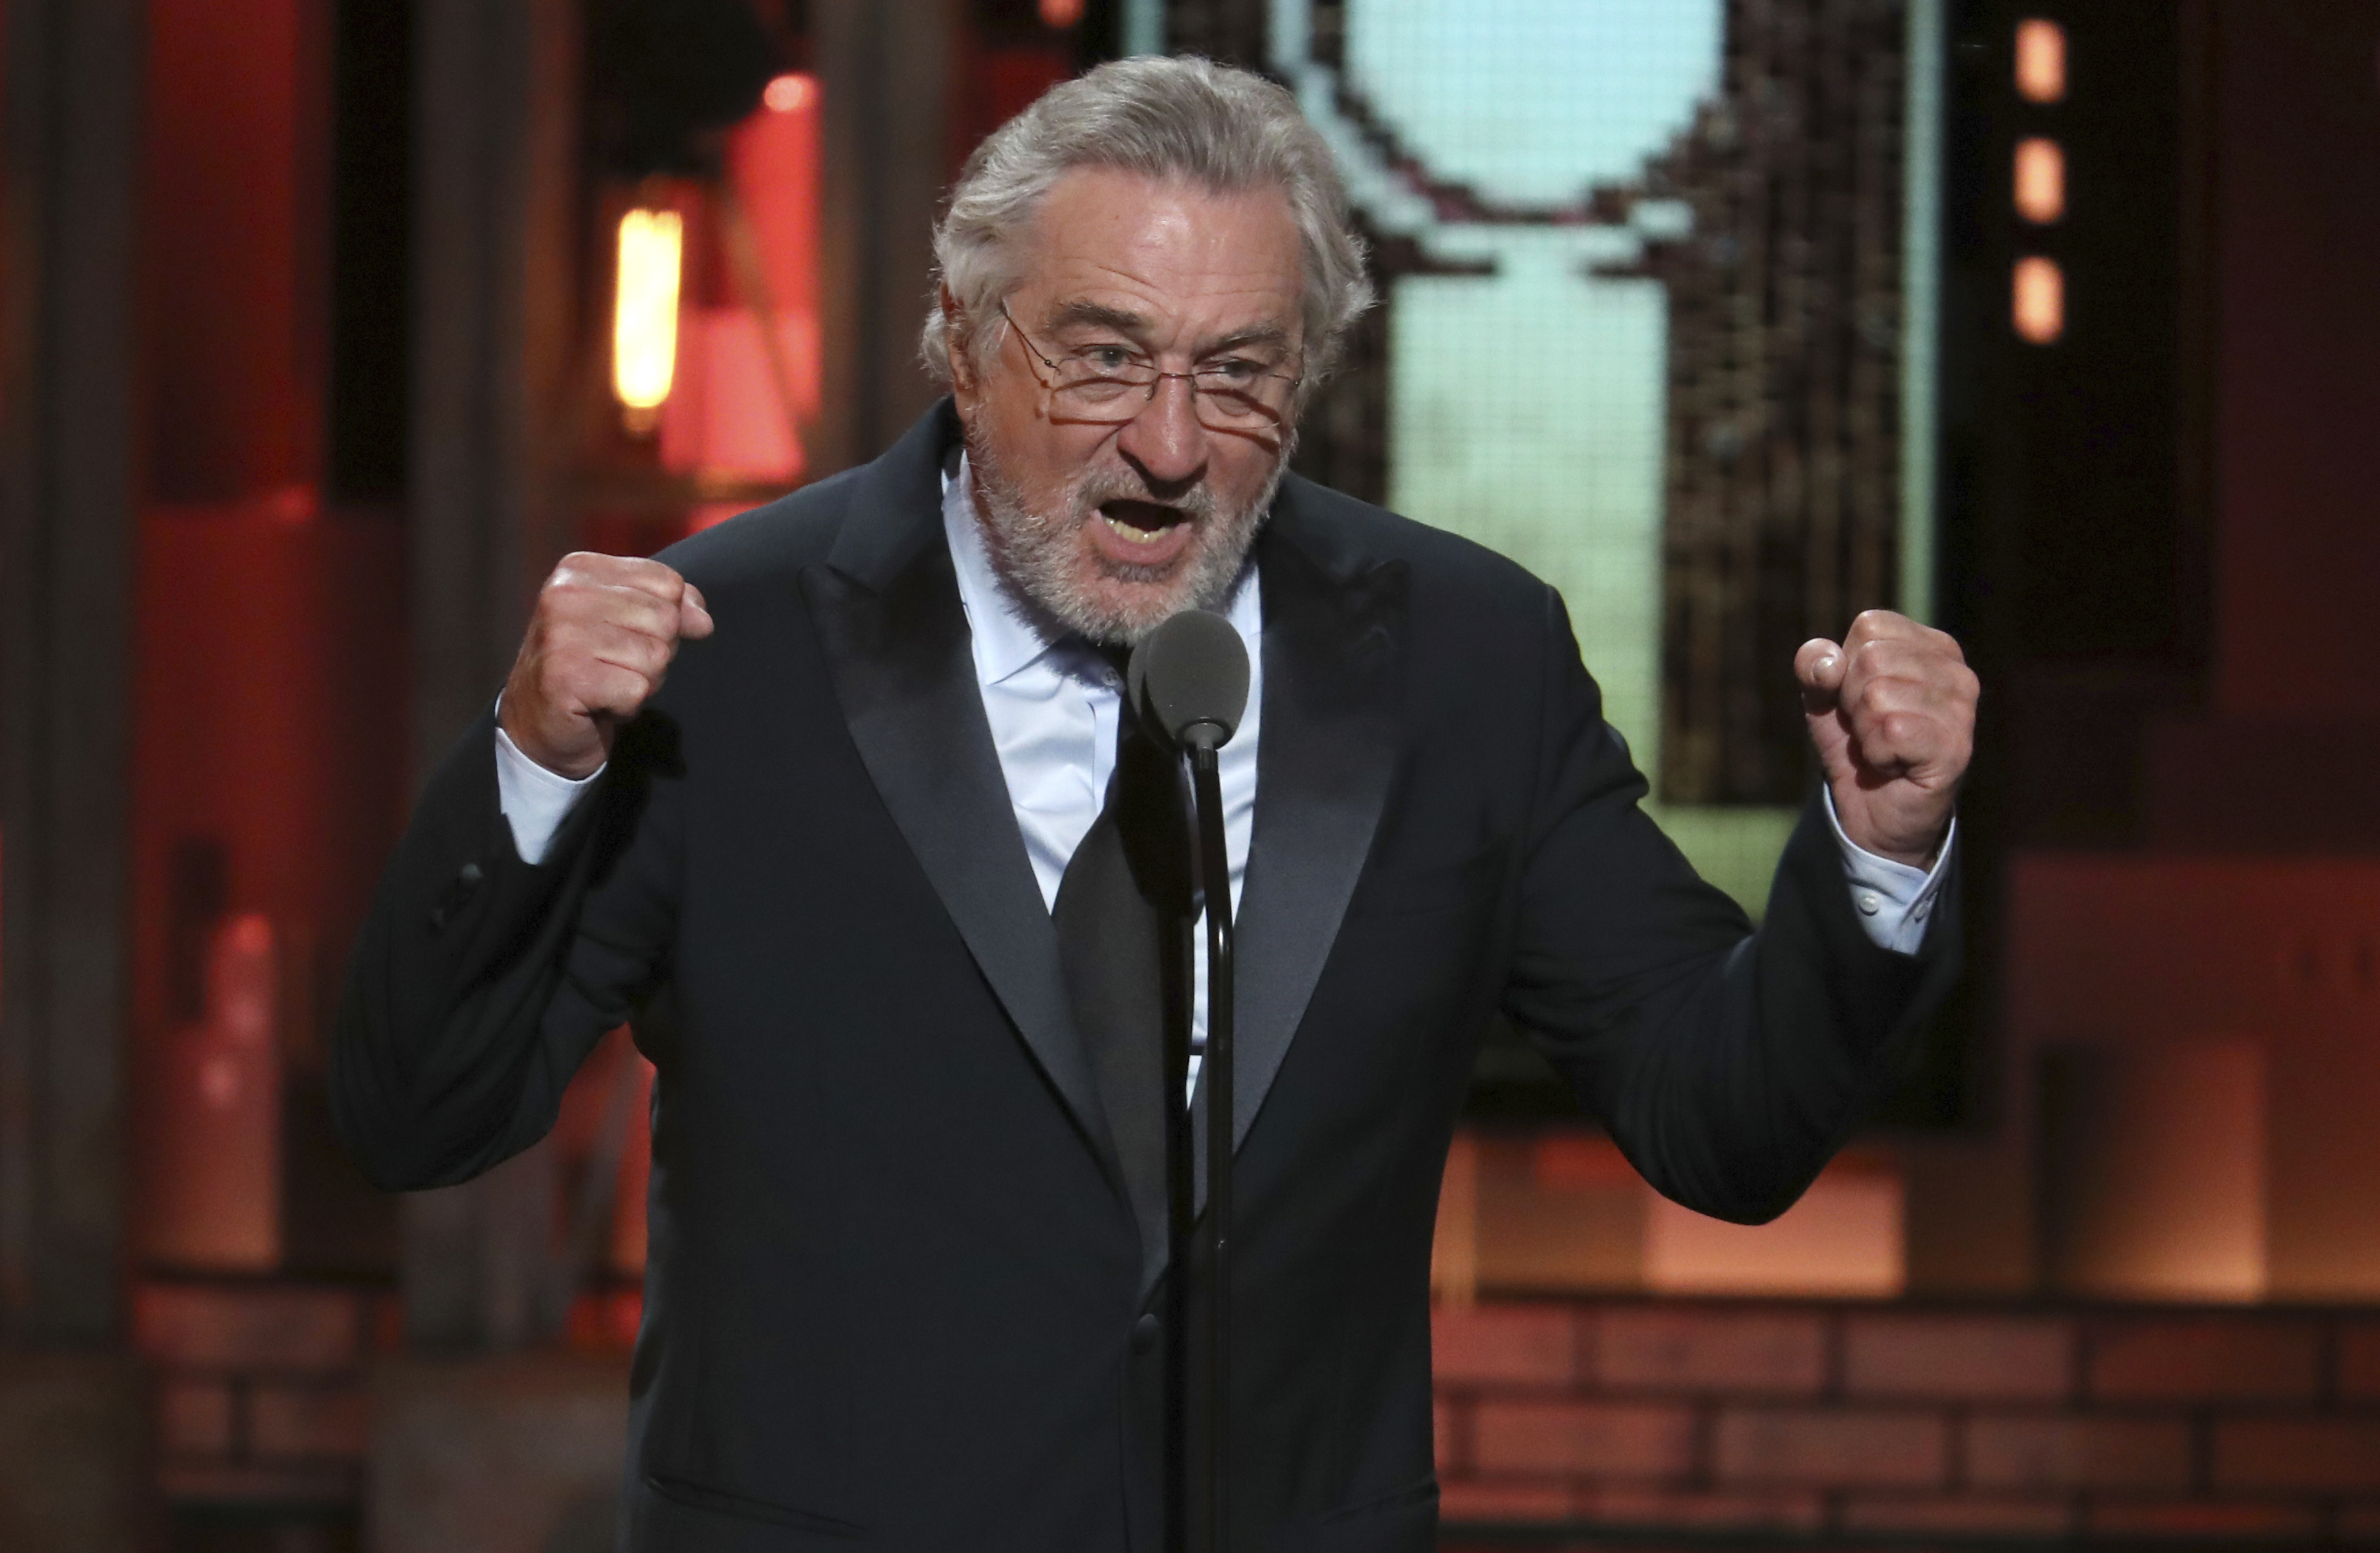 Robert De Niro introduces a performance by Bruce Springsteen at the 72nd annual Tony Awards at Radio City Music Hall on Sunday, June 10, 2018, in New York.</body></html>